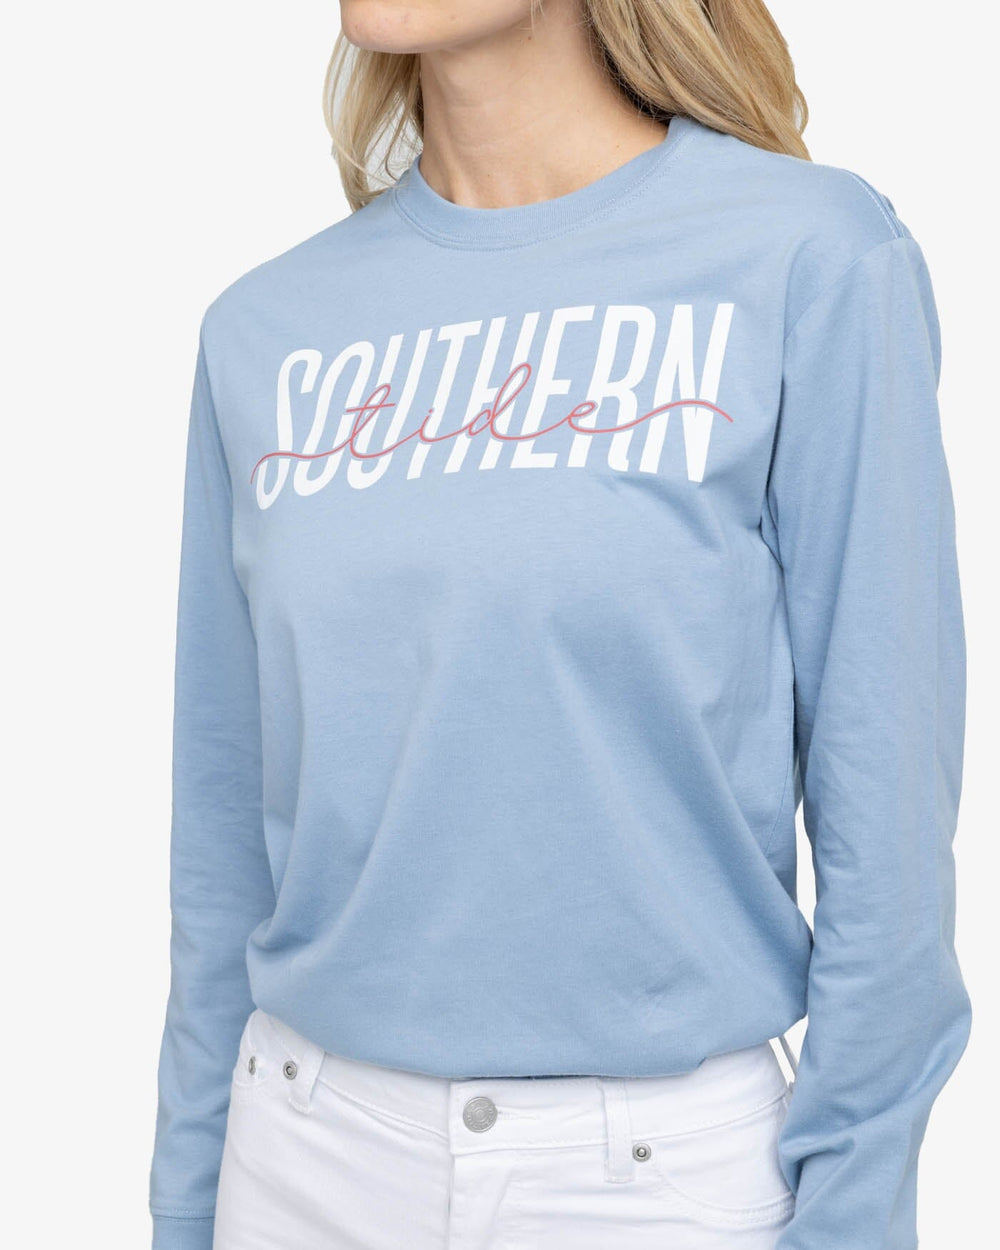 The detail view of the Southern Tide ST Front Print Long Sleeve T-Shirts by Southern Tide - Mountain Spring Blue